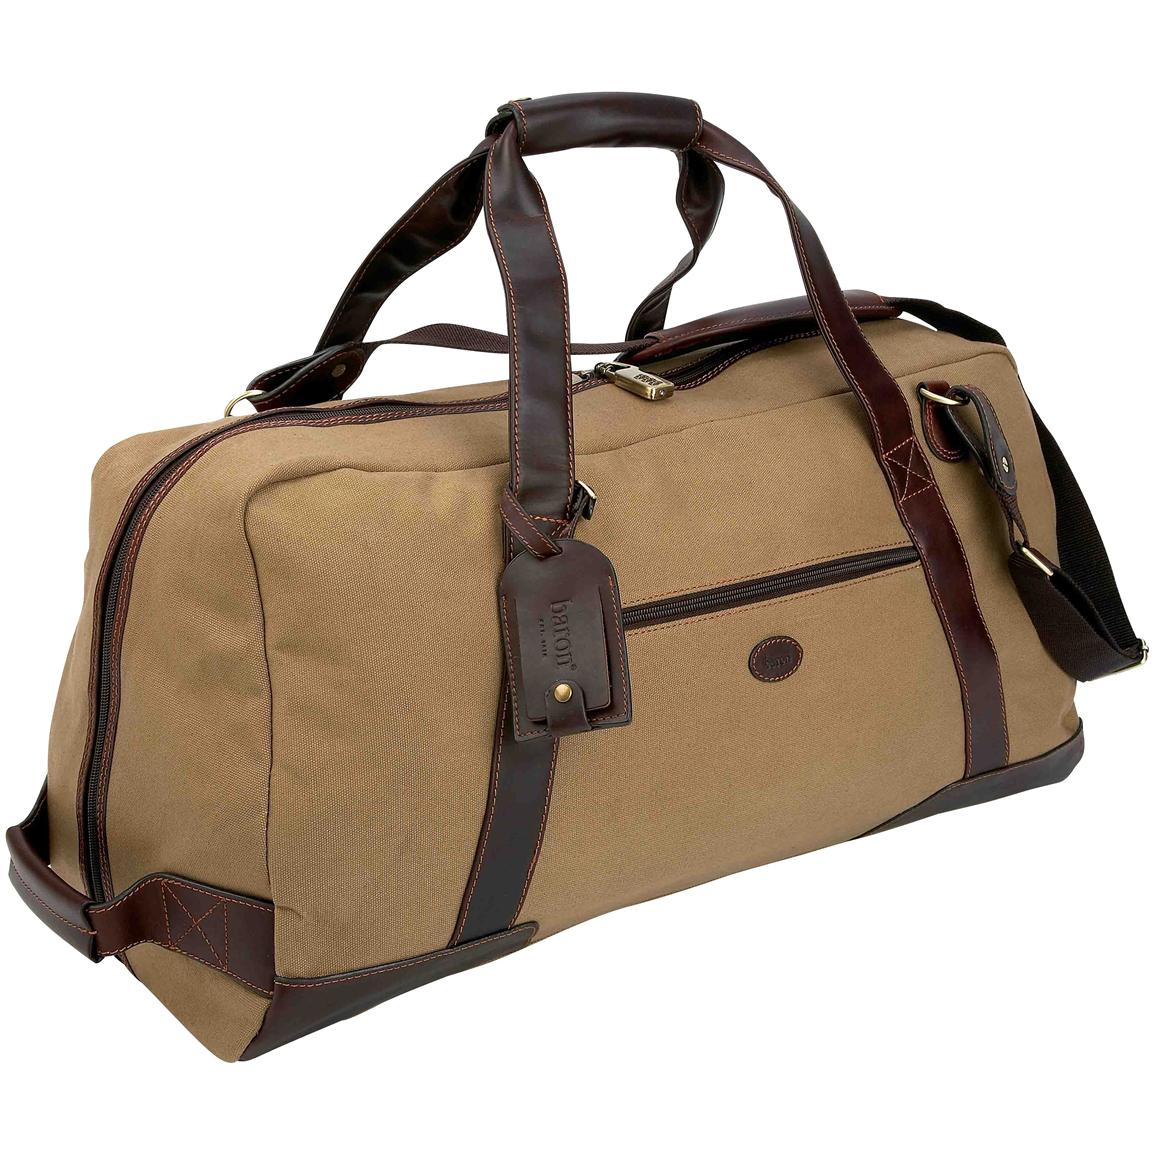 Leather Duffle Bags For Sale | IQS Executive